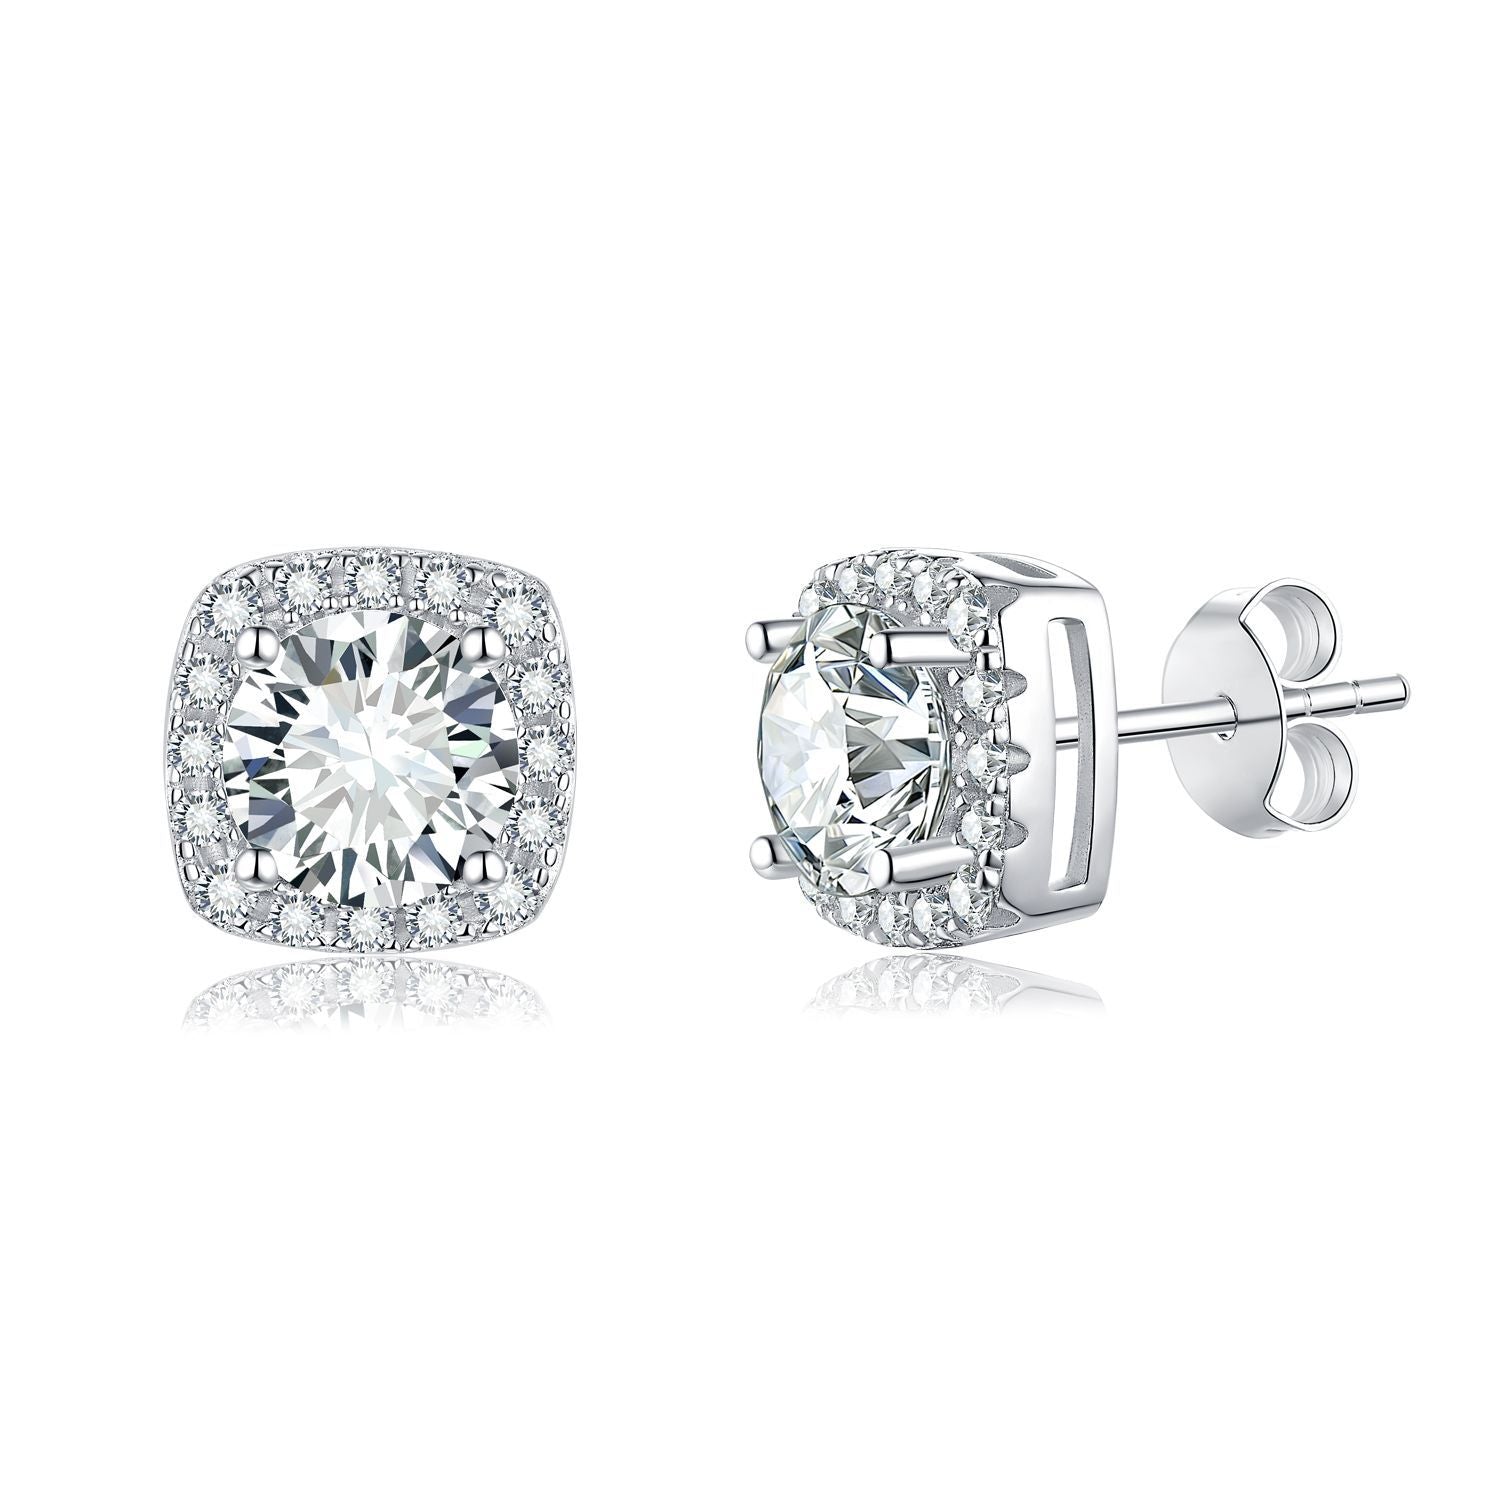 The Classic Series 1ct Moissanite Earrings Studs